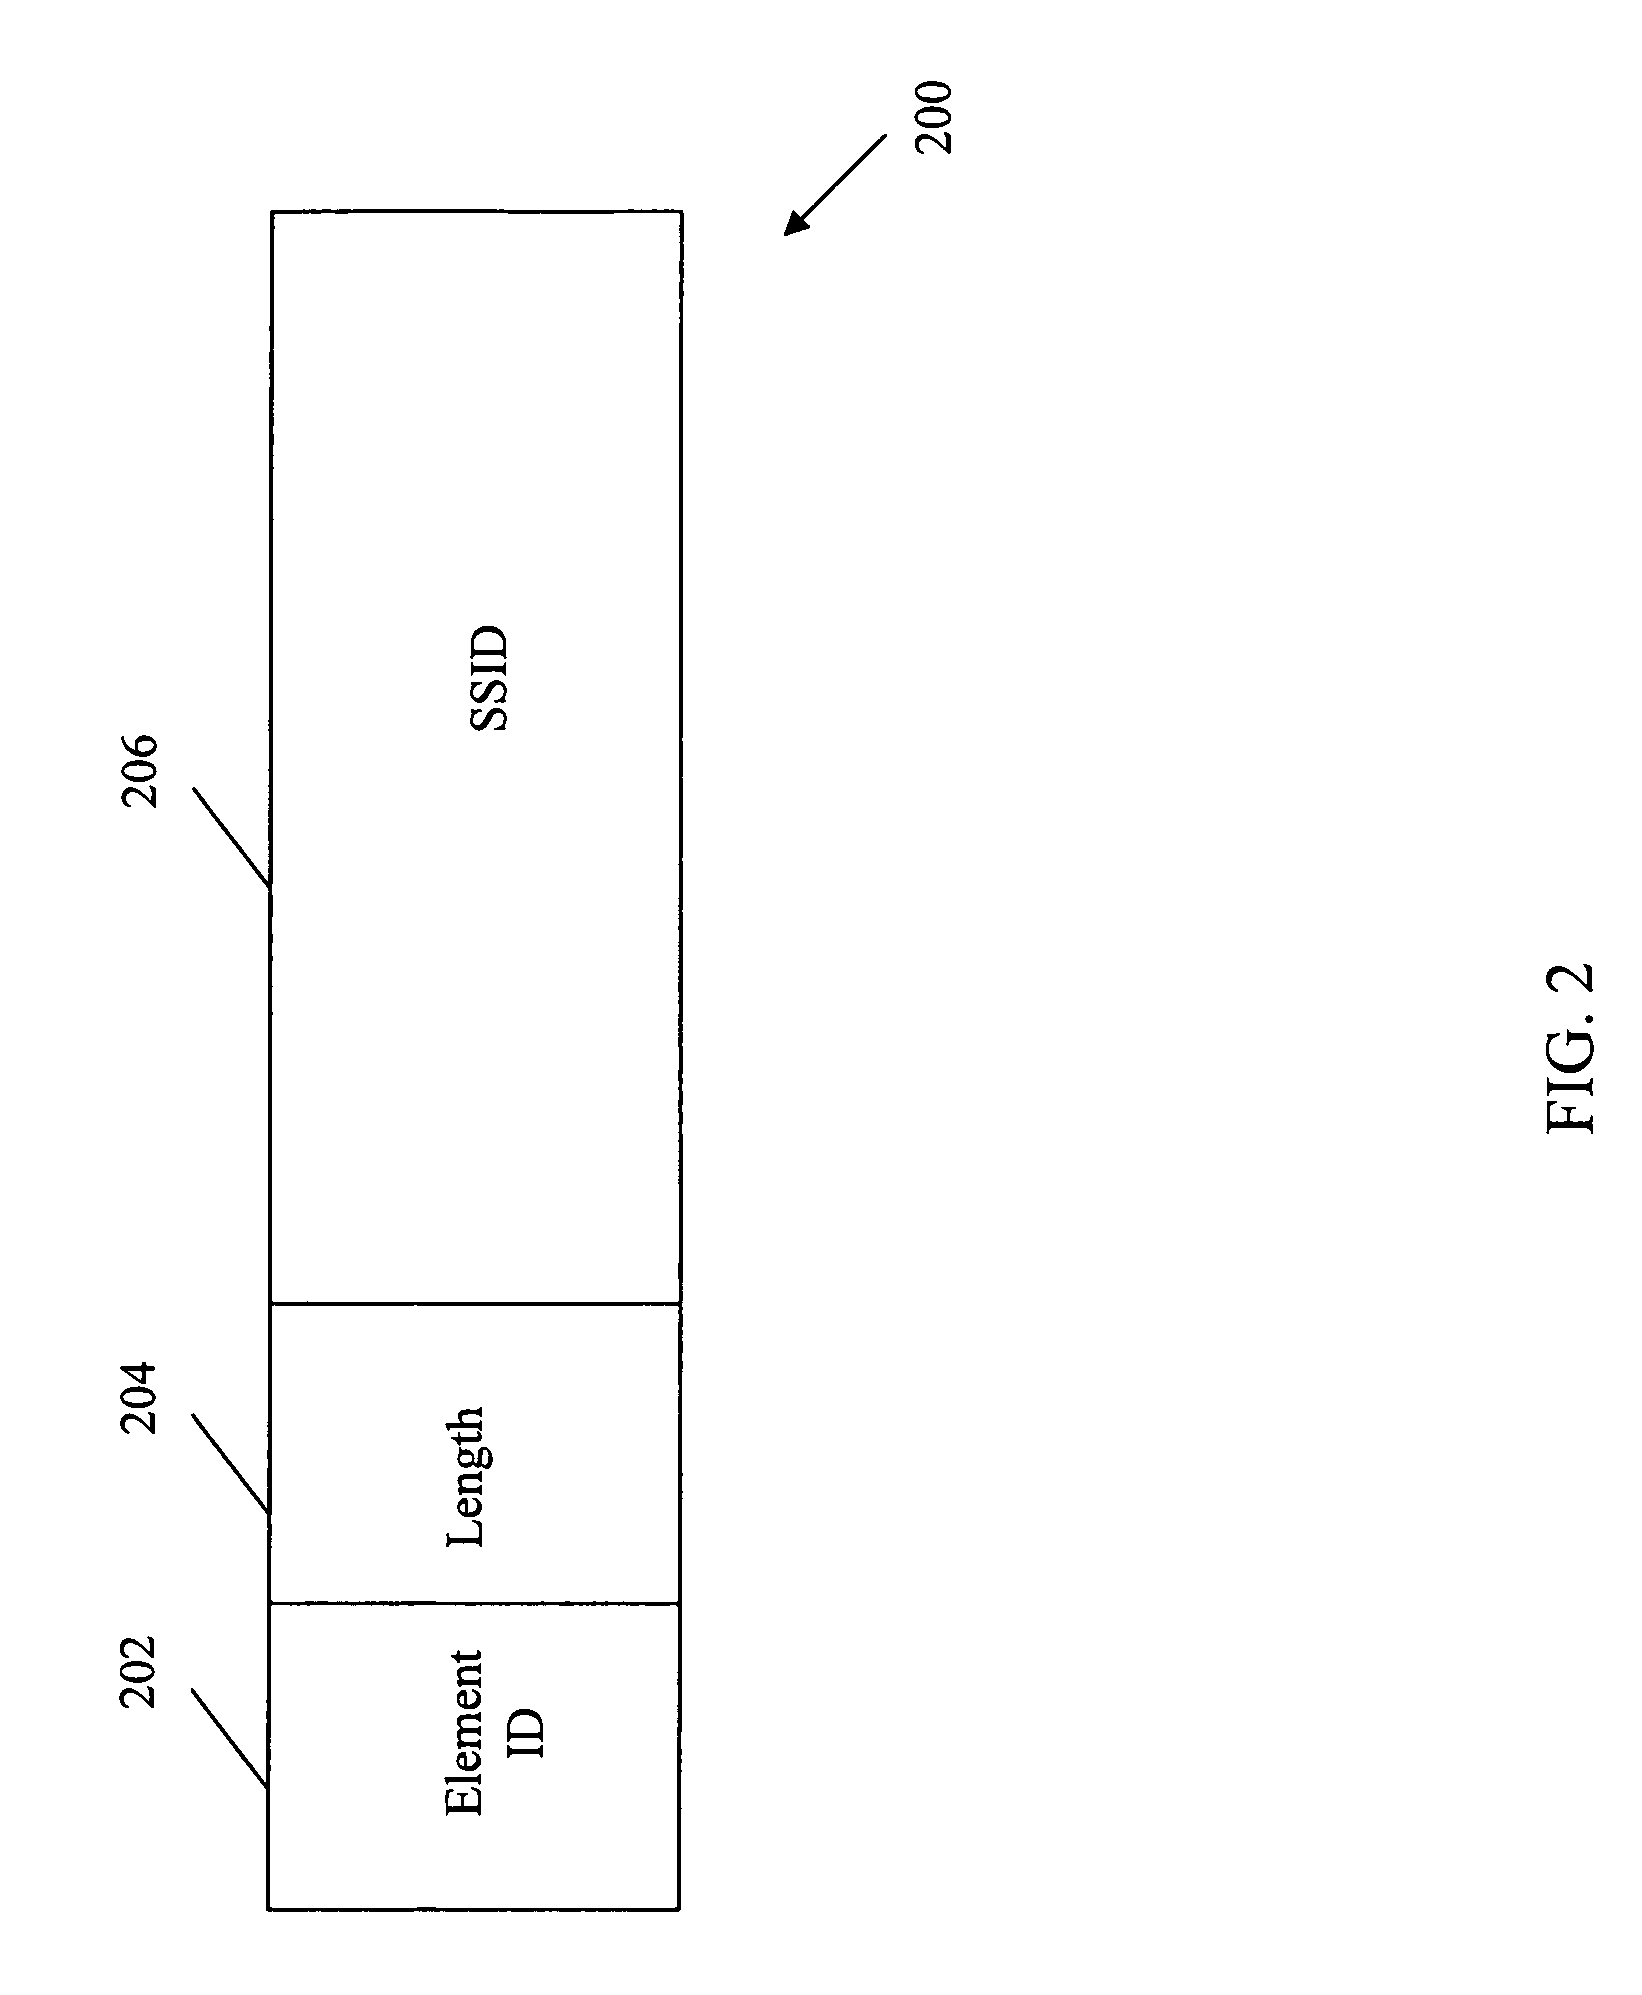 System and method for robust data loss recovery in a wireless local area network